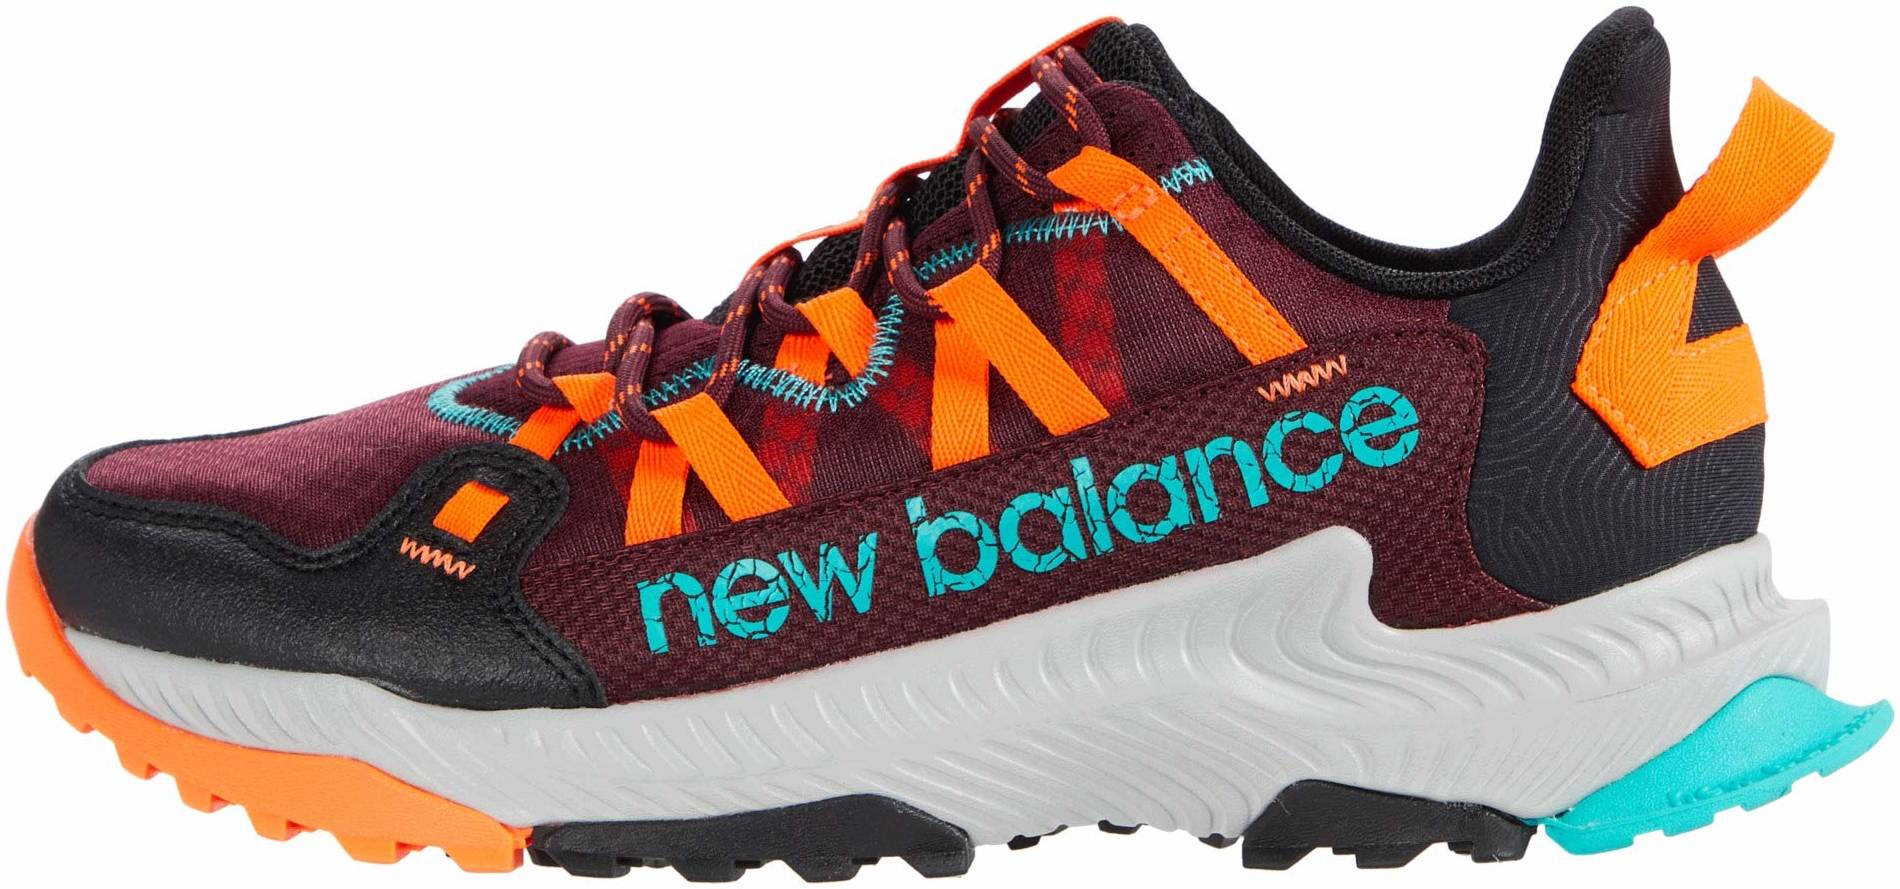 20+ New Balance trail running shoes: Save up to 38% | RunRepeat مكنسه ومجرفه